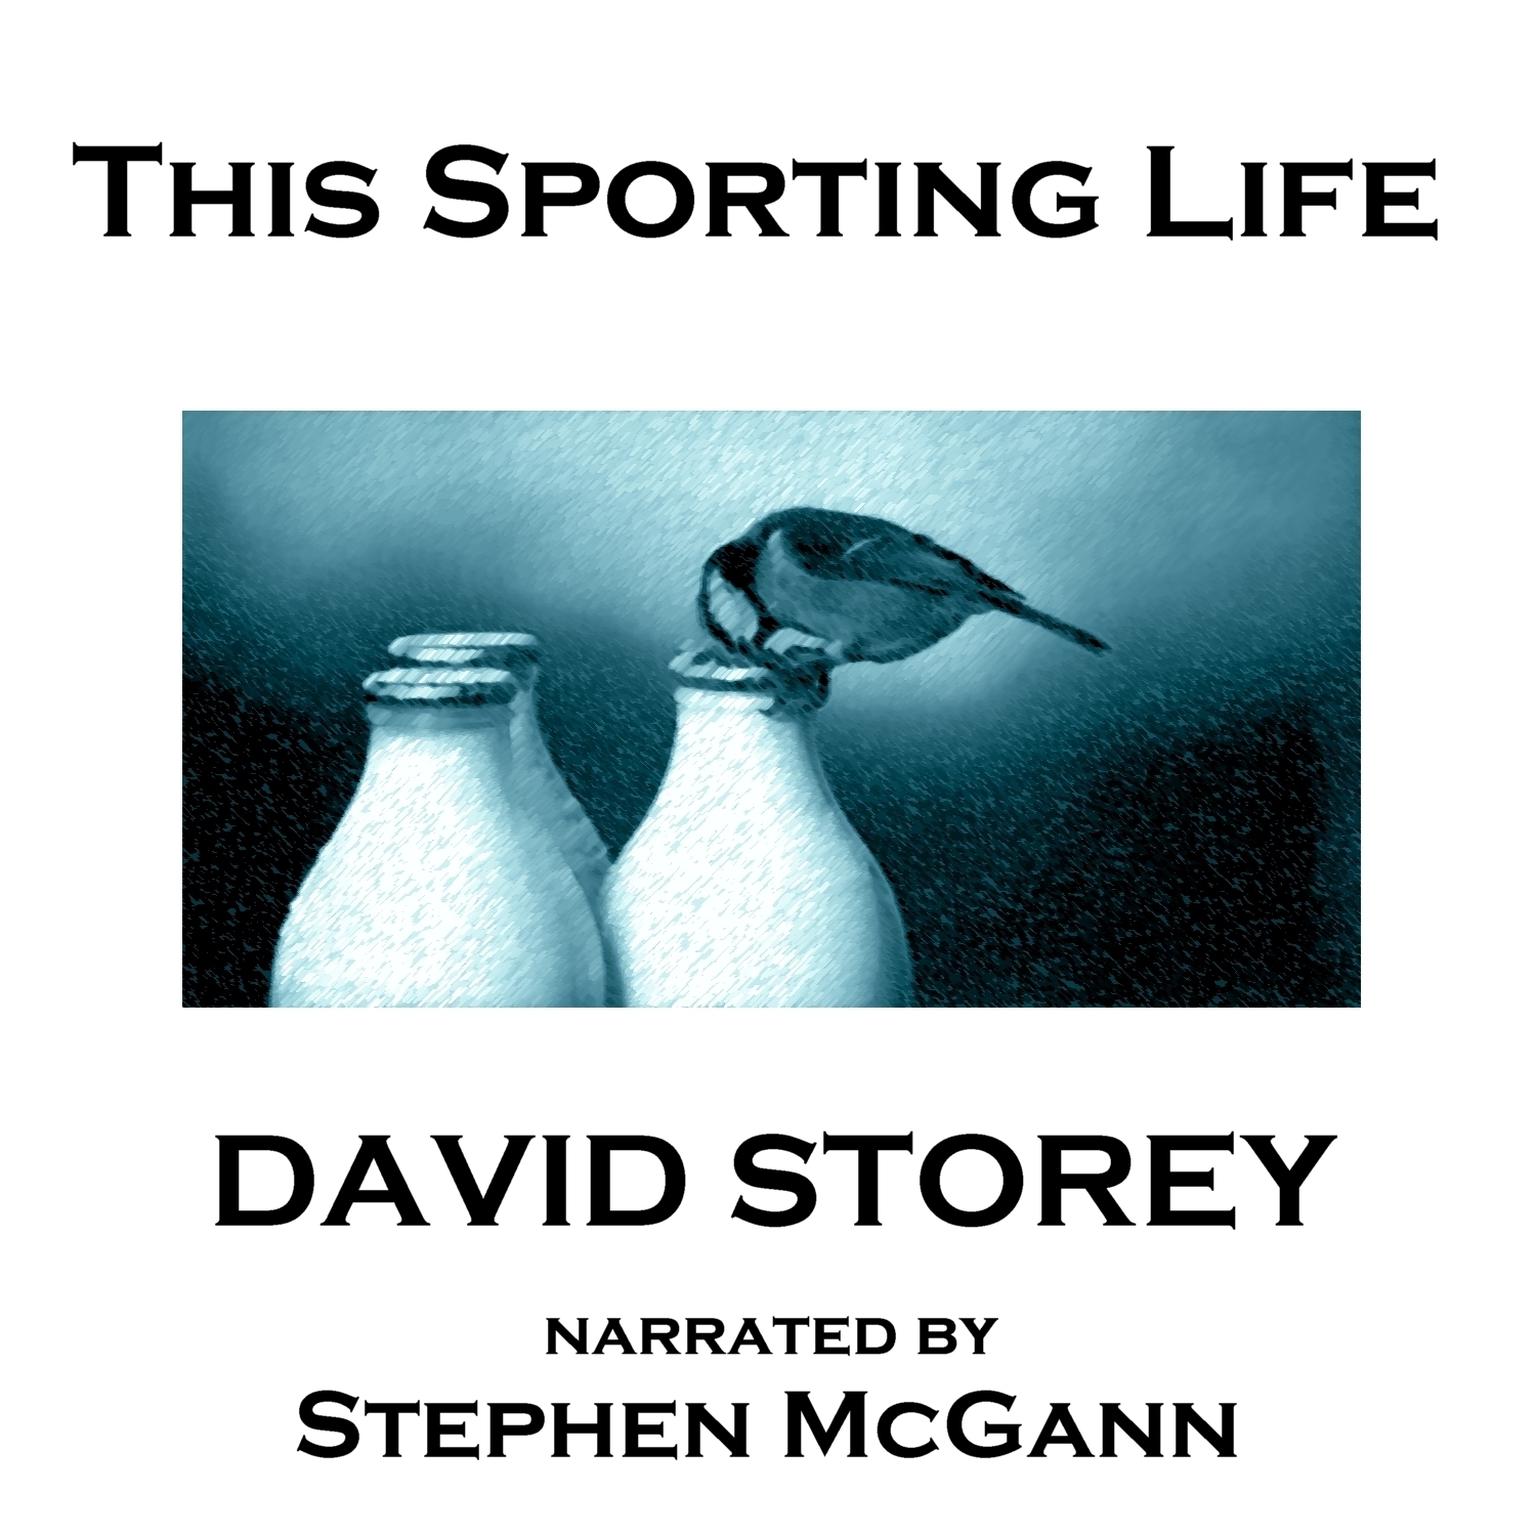 This Sporting Life (Abridged) Audiobook, by David Storey